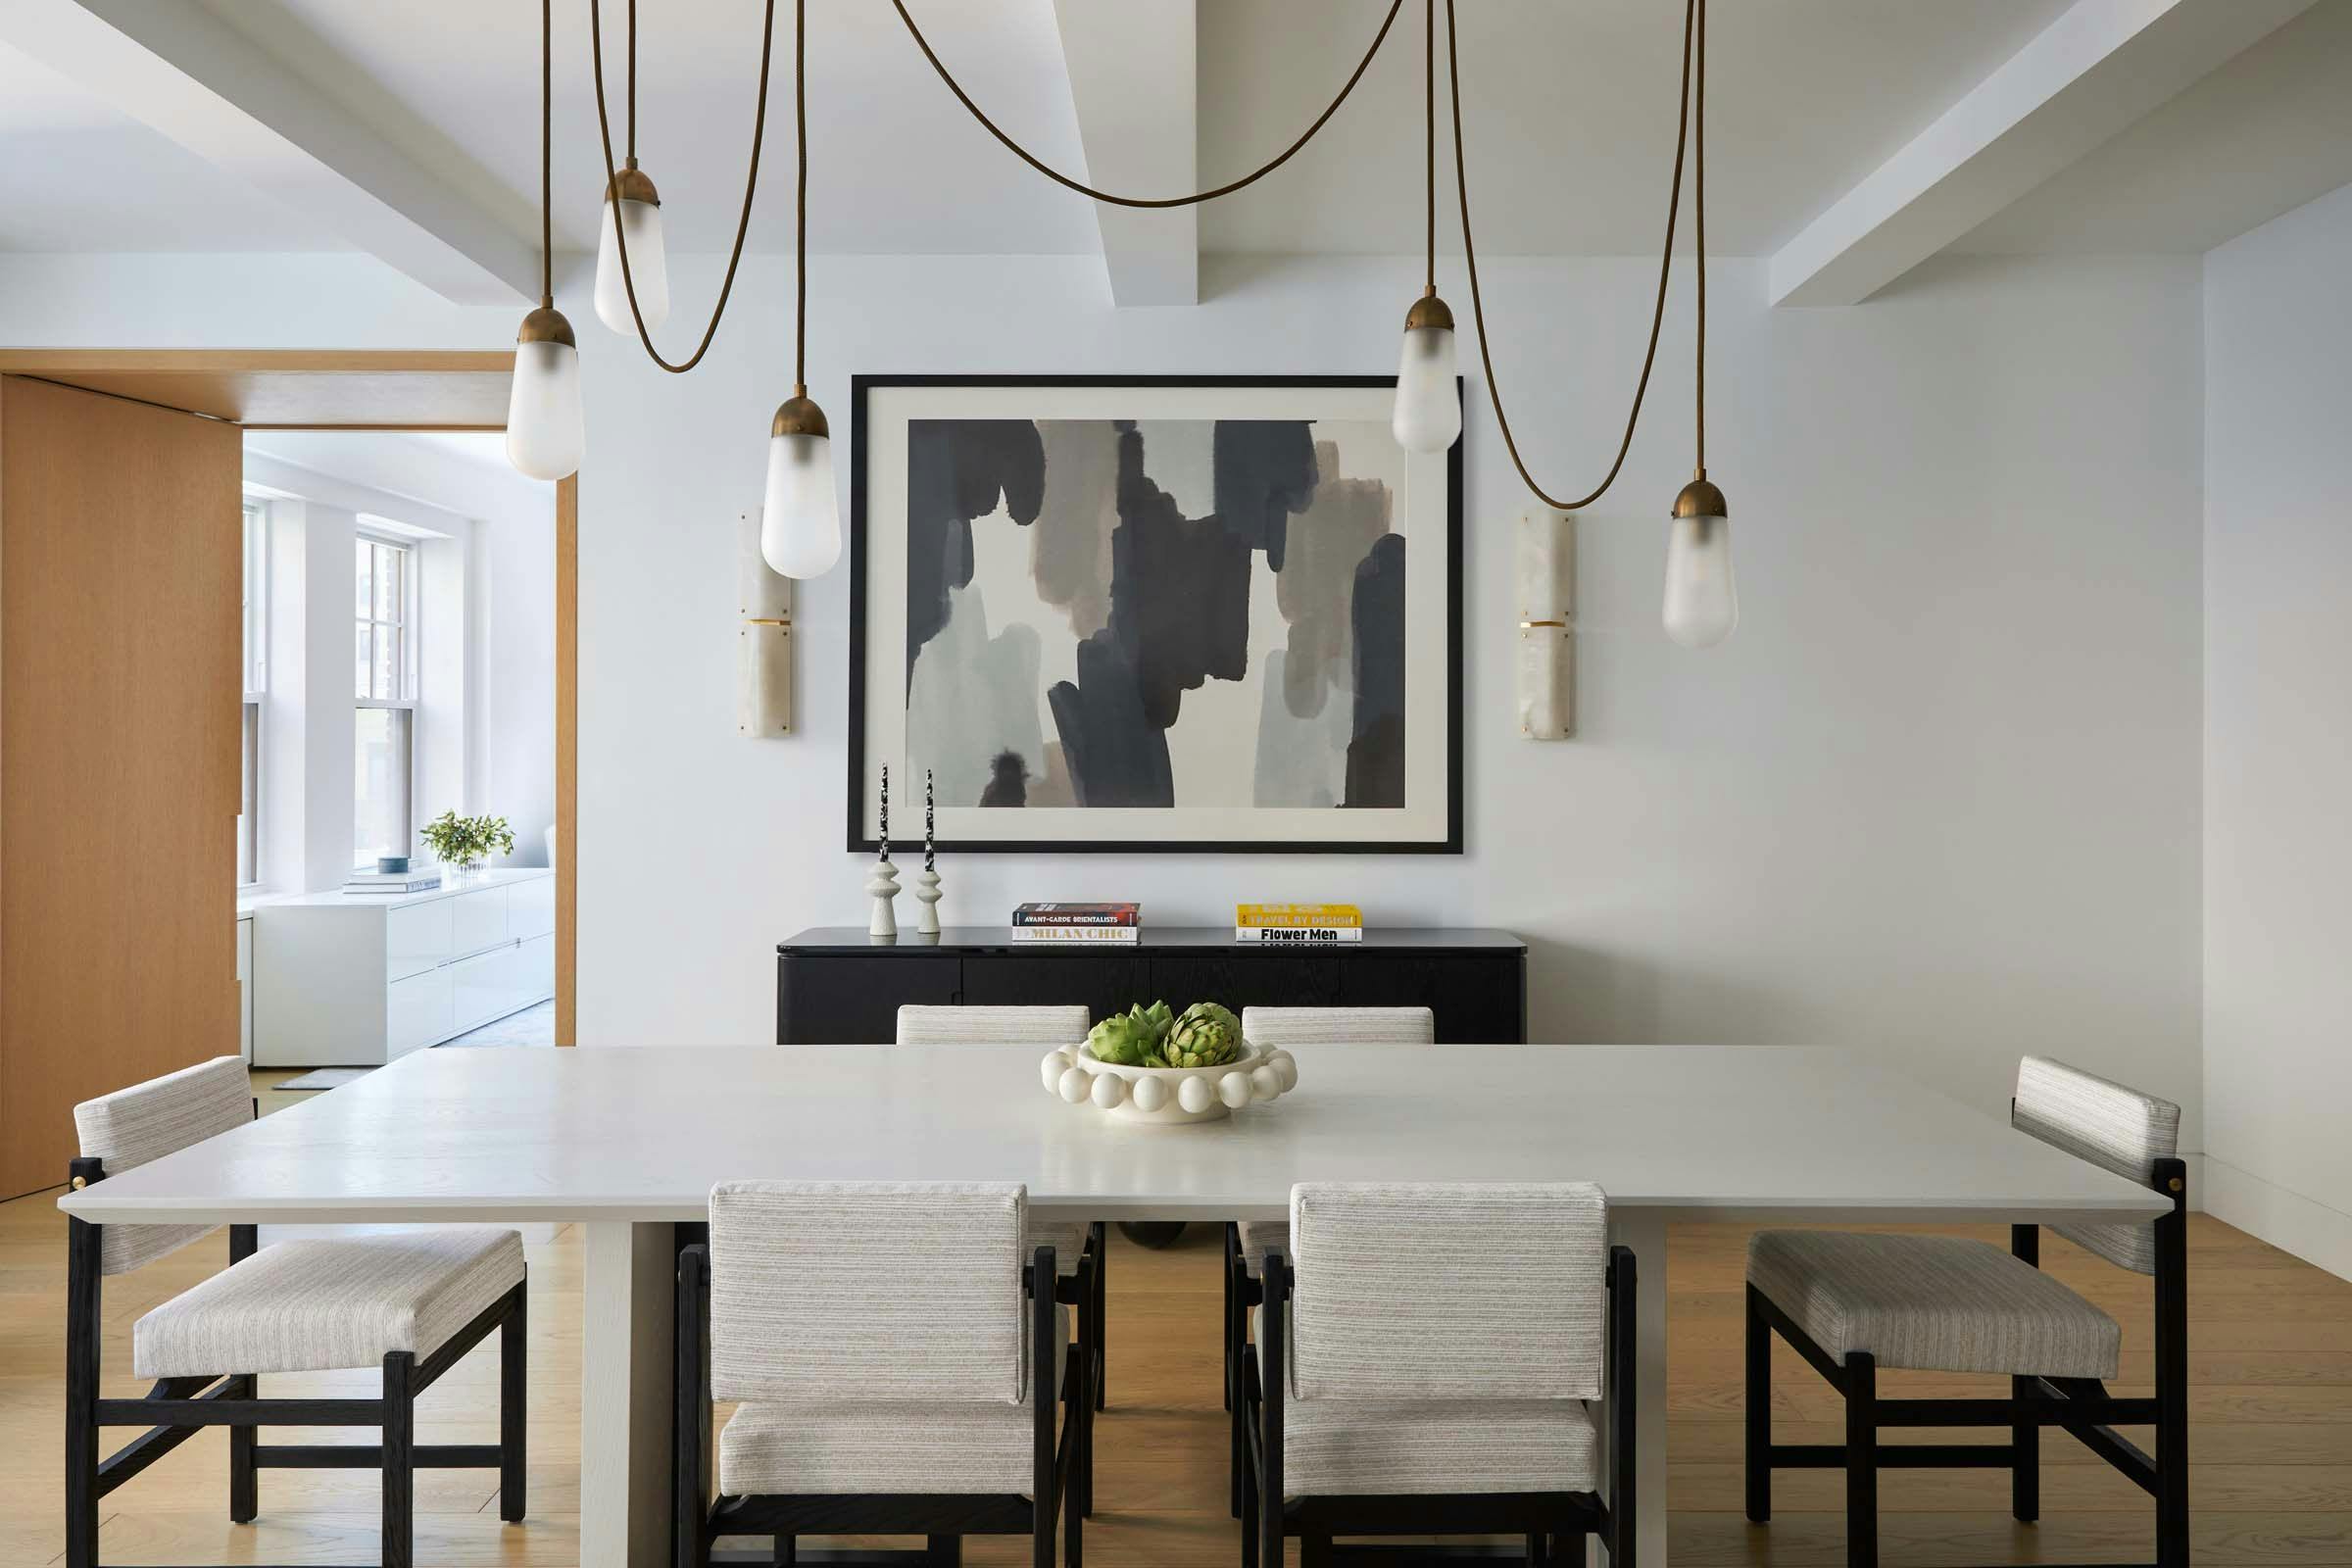 Dining room with white table and balck and white chairs and dangling light fixture